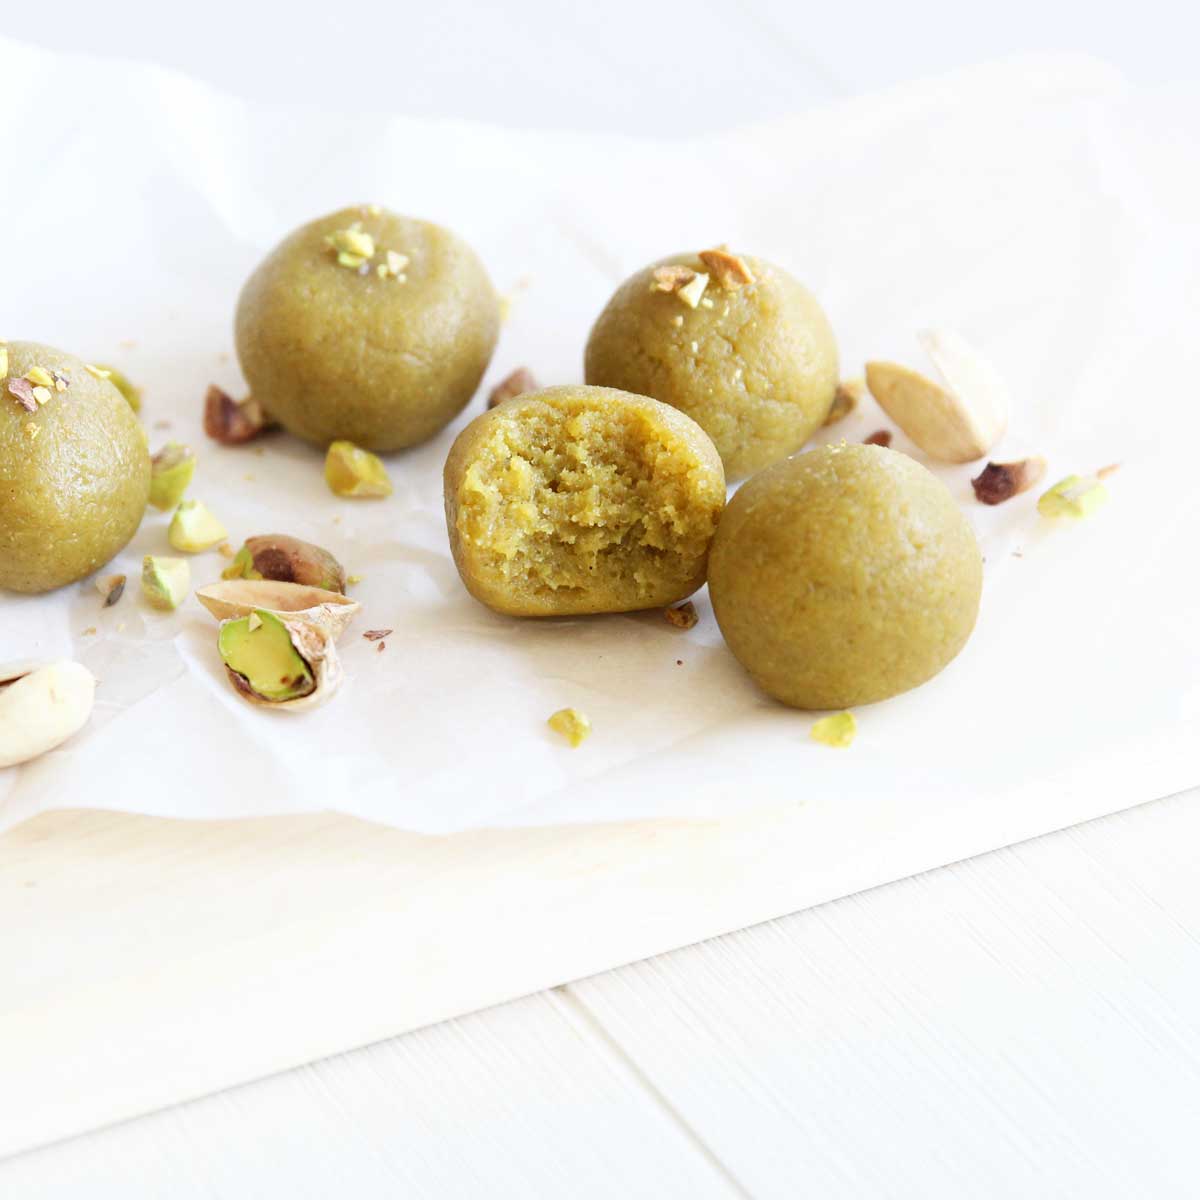 Keto Pistachio Cheesecake Protein Balls (Low Carb Energy Bites made with Collagen Peptides) - Savory Sweet Corn Mochi